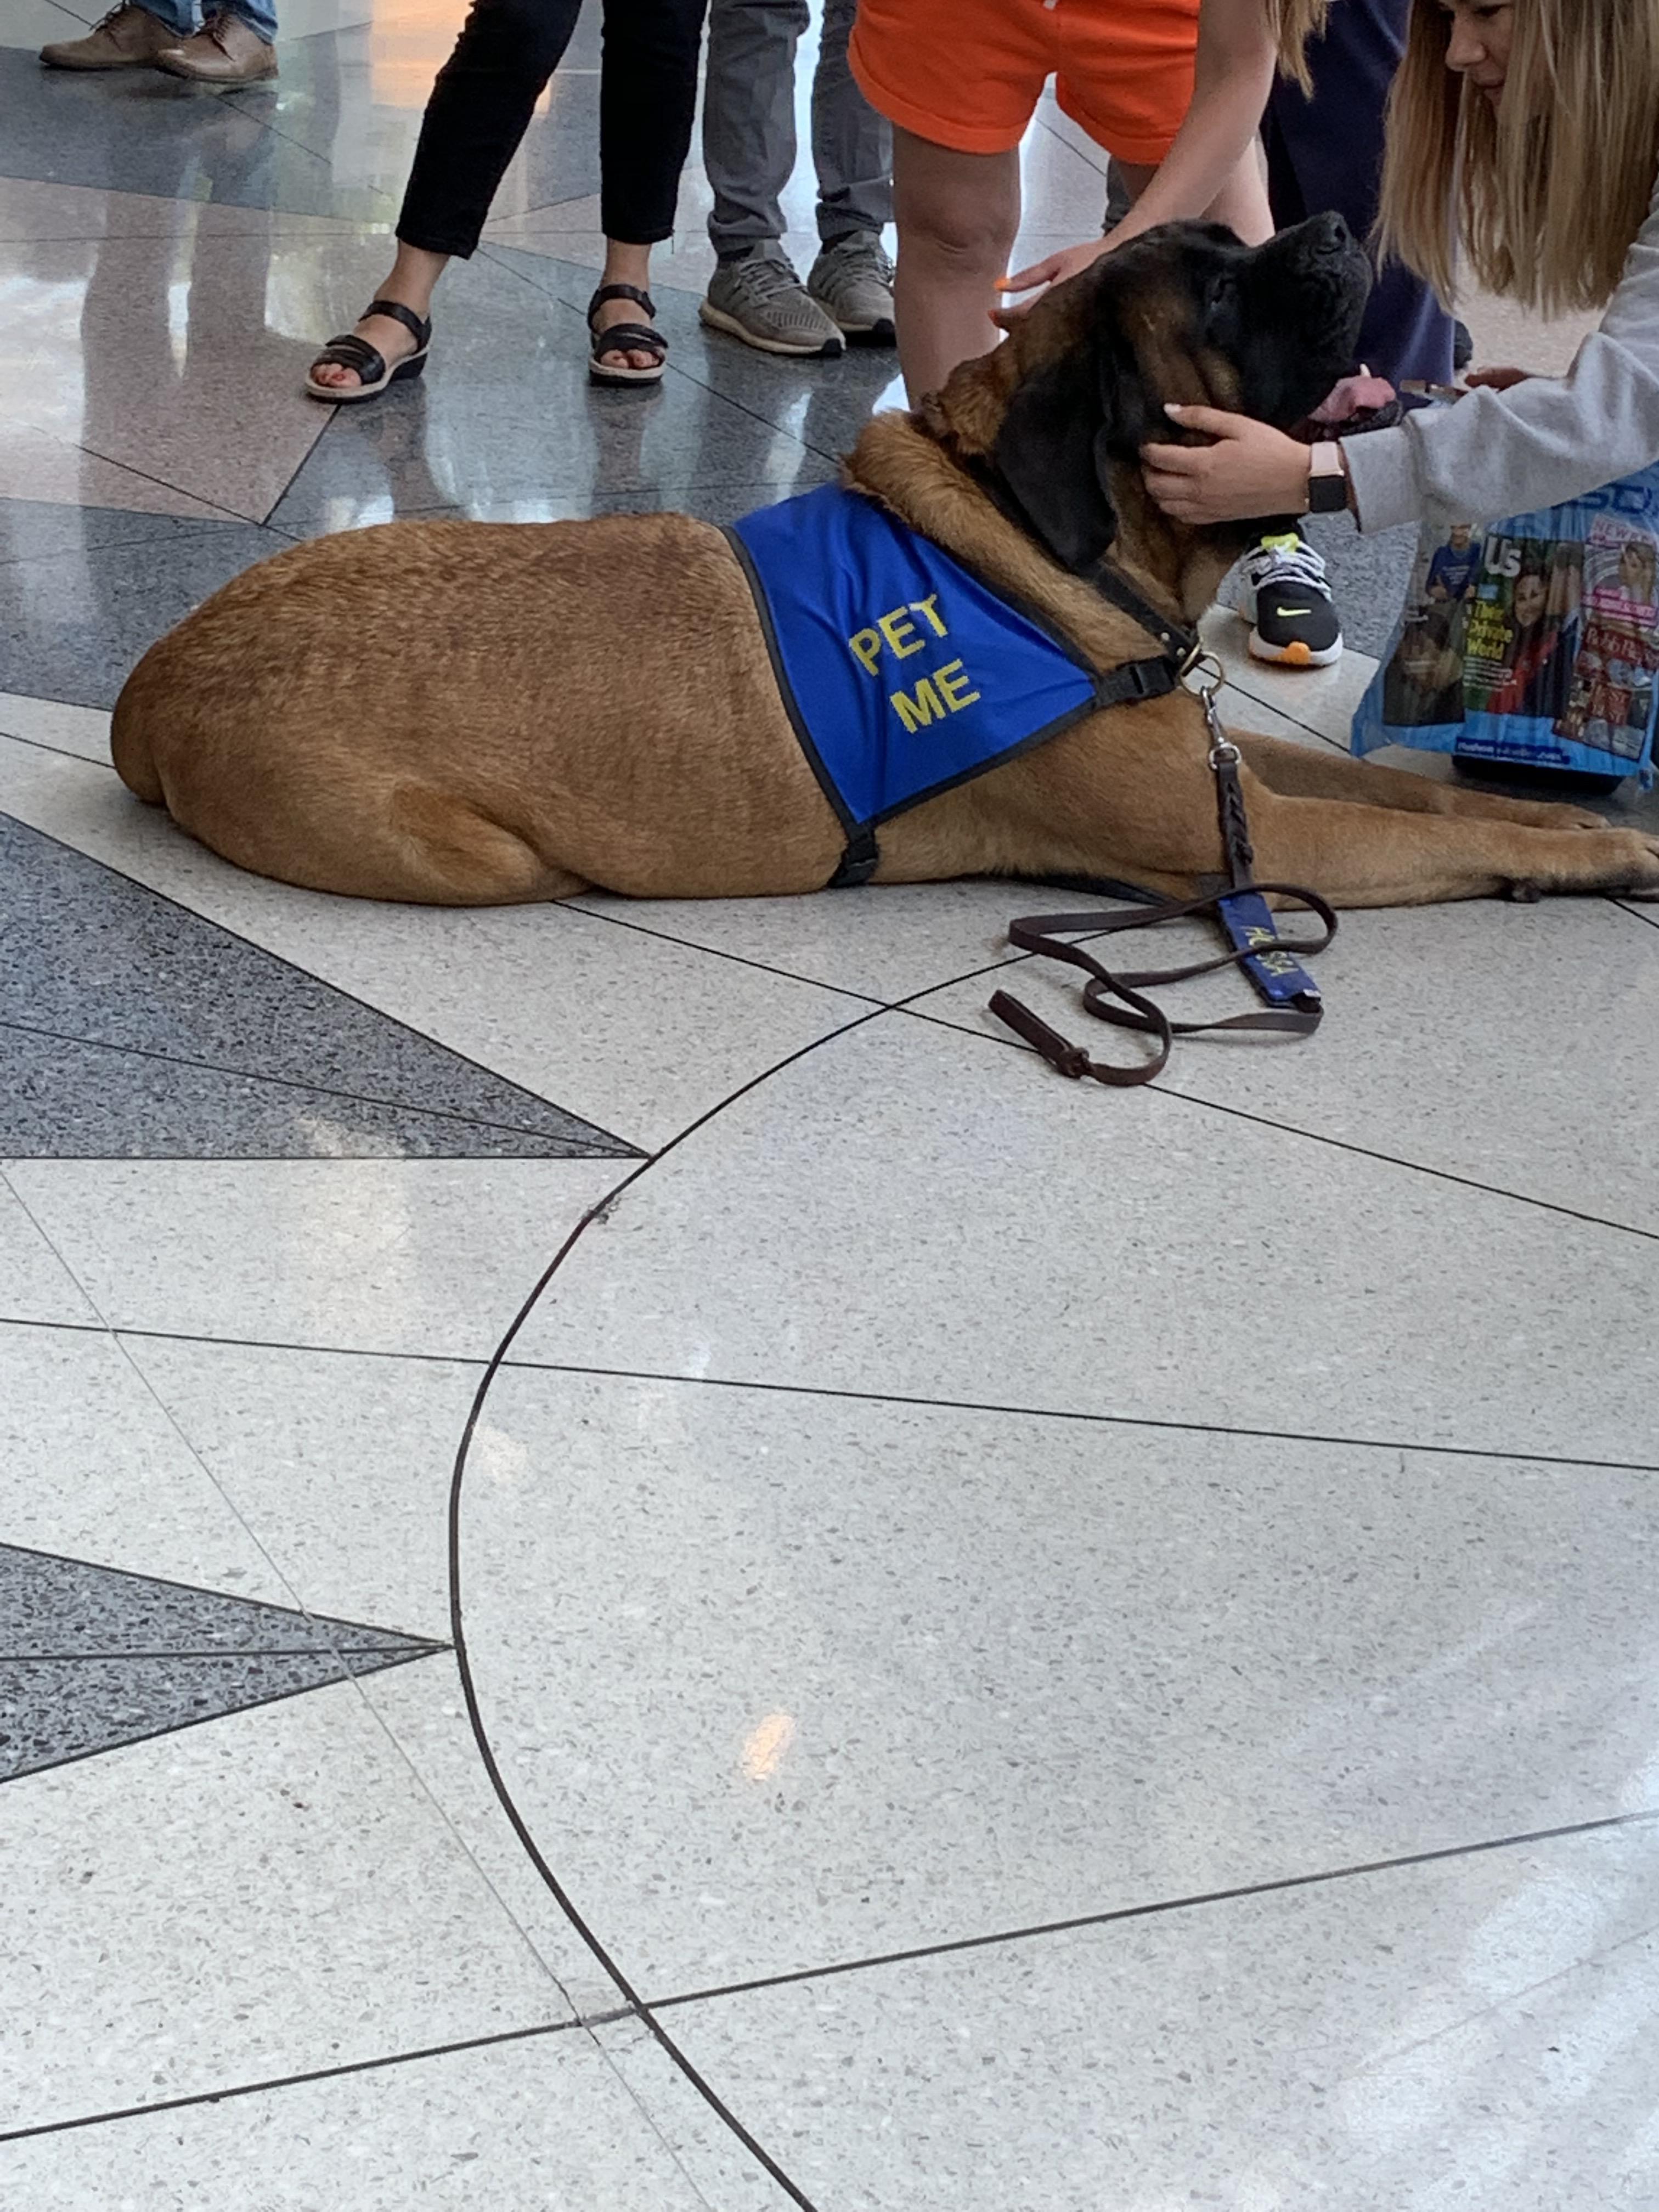 PSA: the Charlotte NC airport has service dogs that anyone can play with.